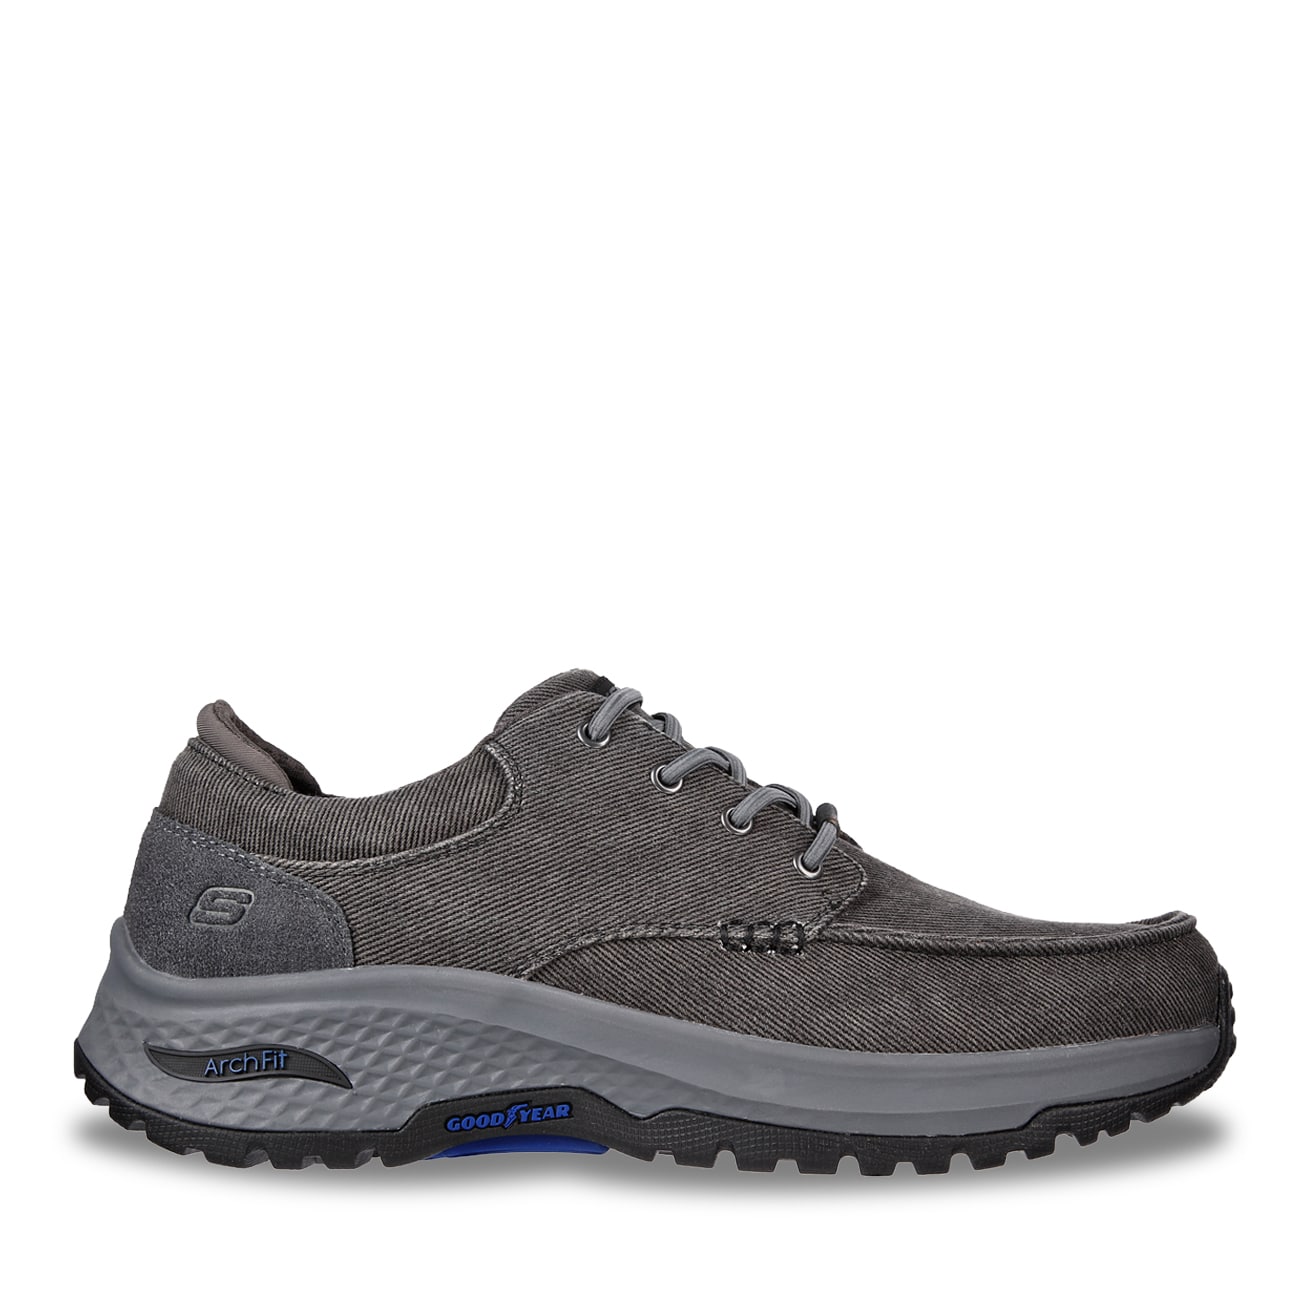 Skechers Men's Arch Fit Ripple Poliver Wide Width Oxford | The Shoe Company